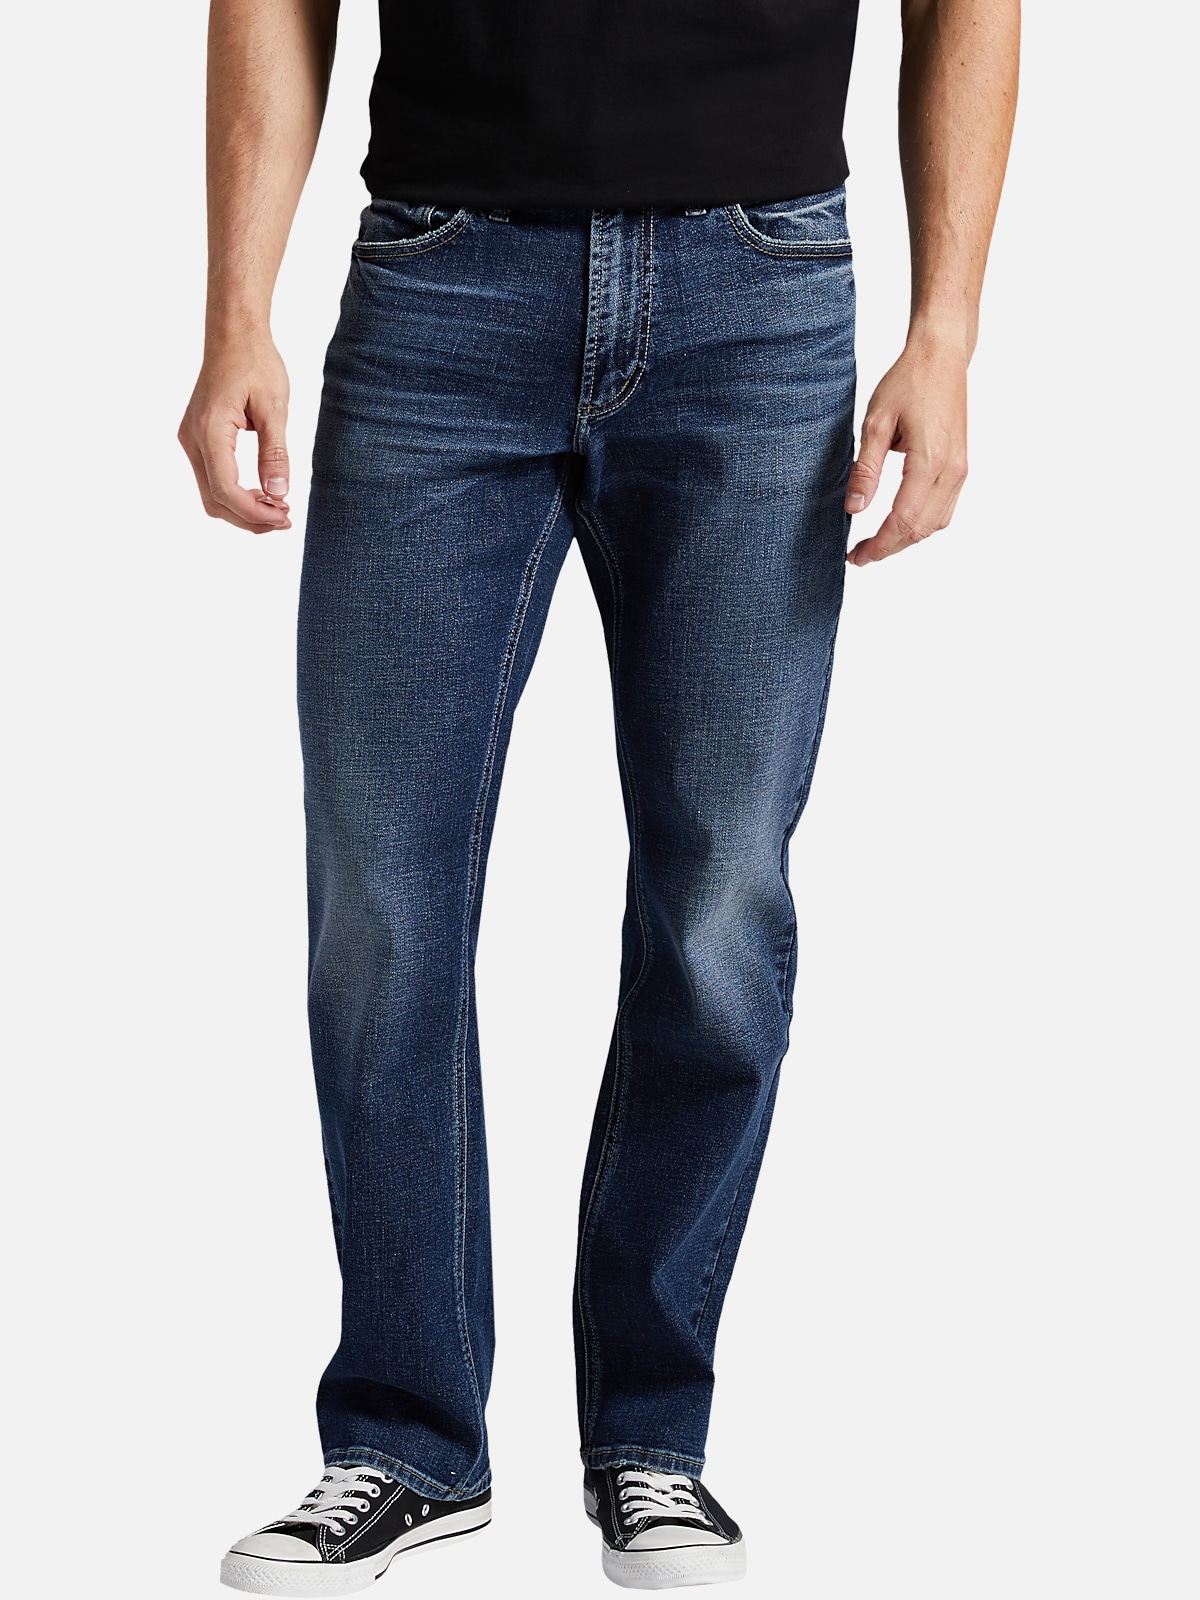 Silver Jeans Grayson Classic Fit Straight Jeans | All Clearance $39.99 ...